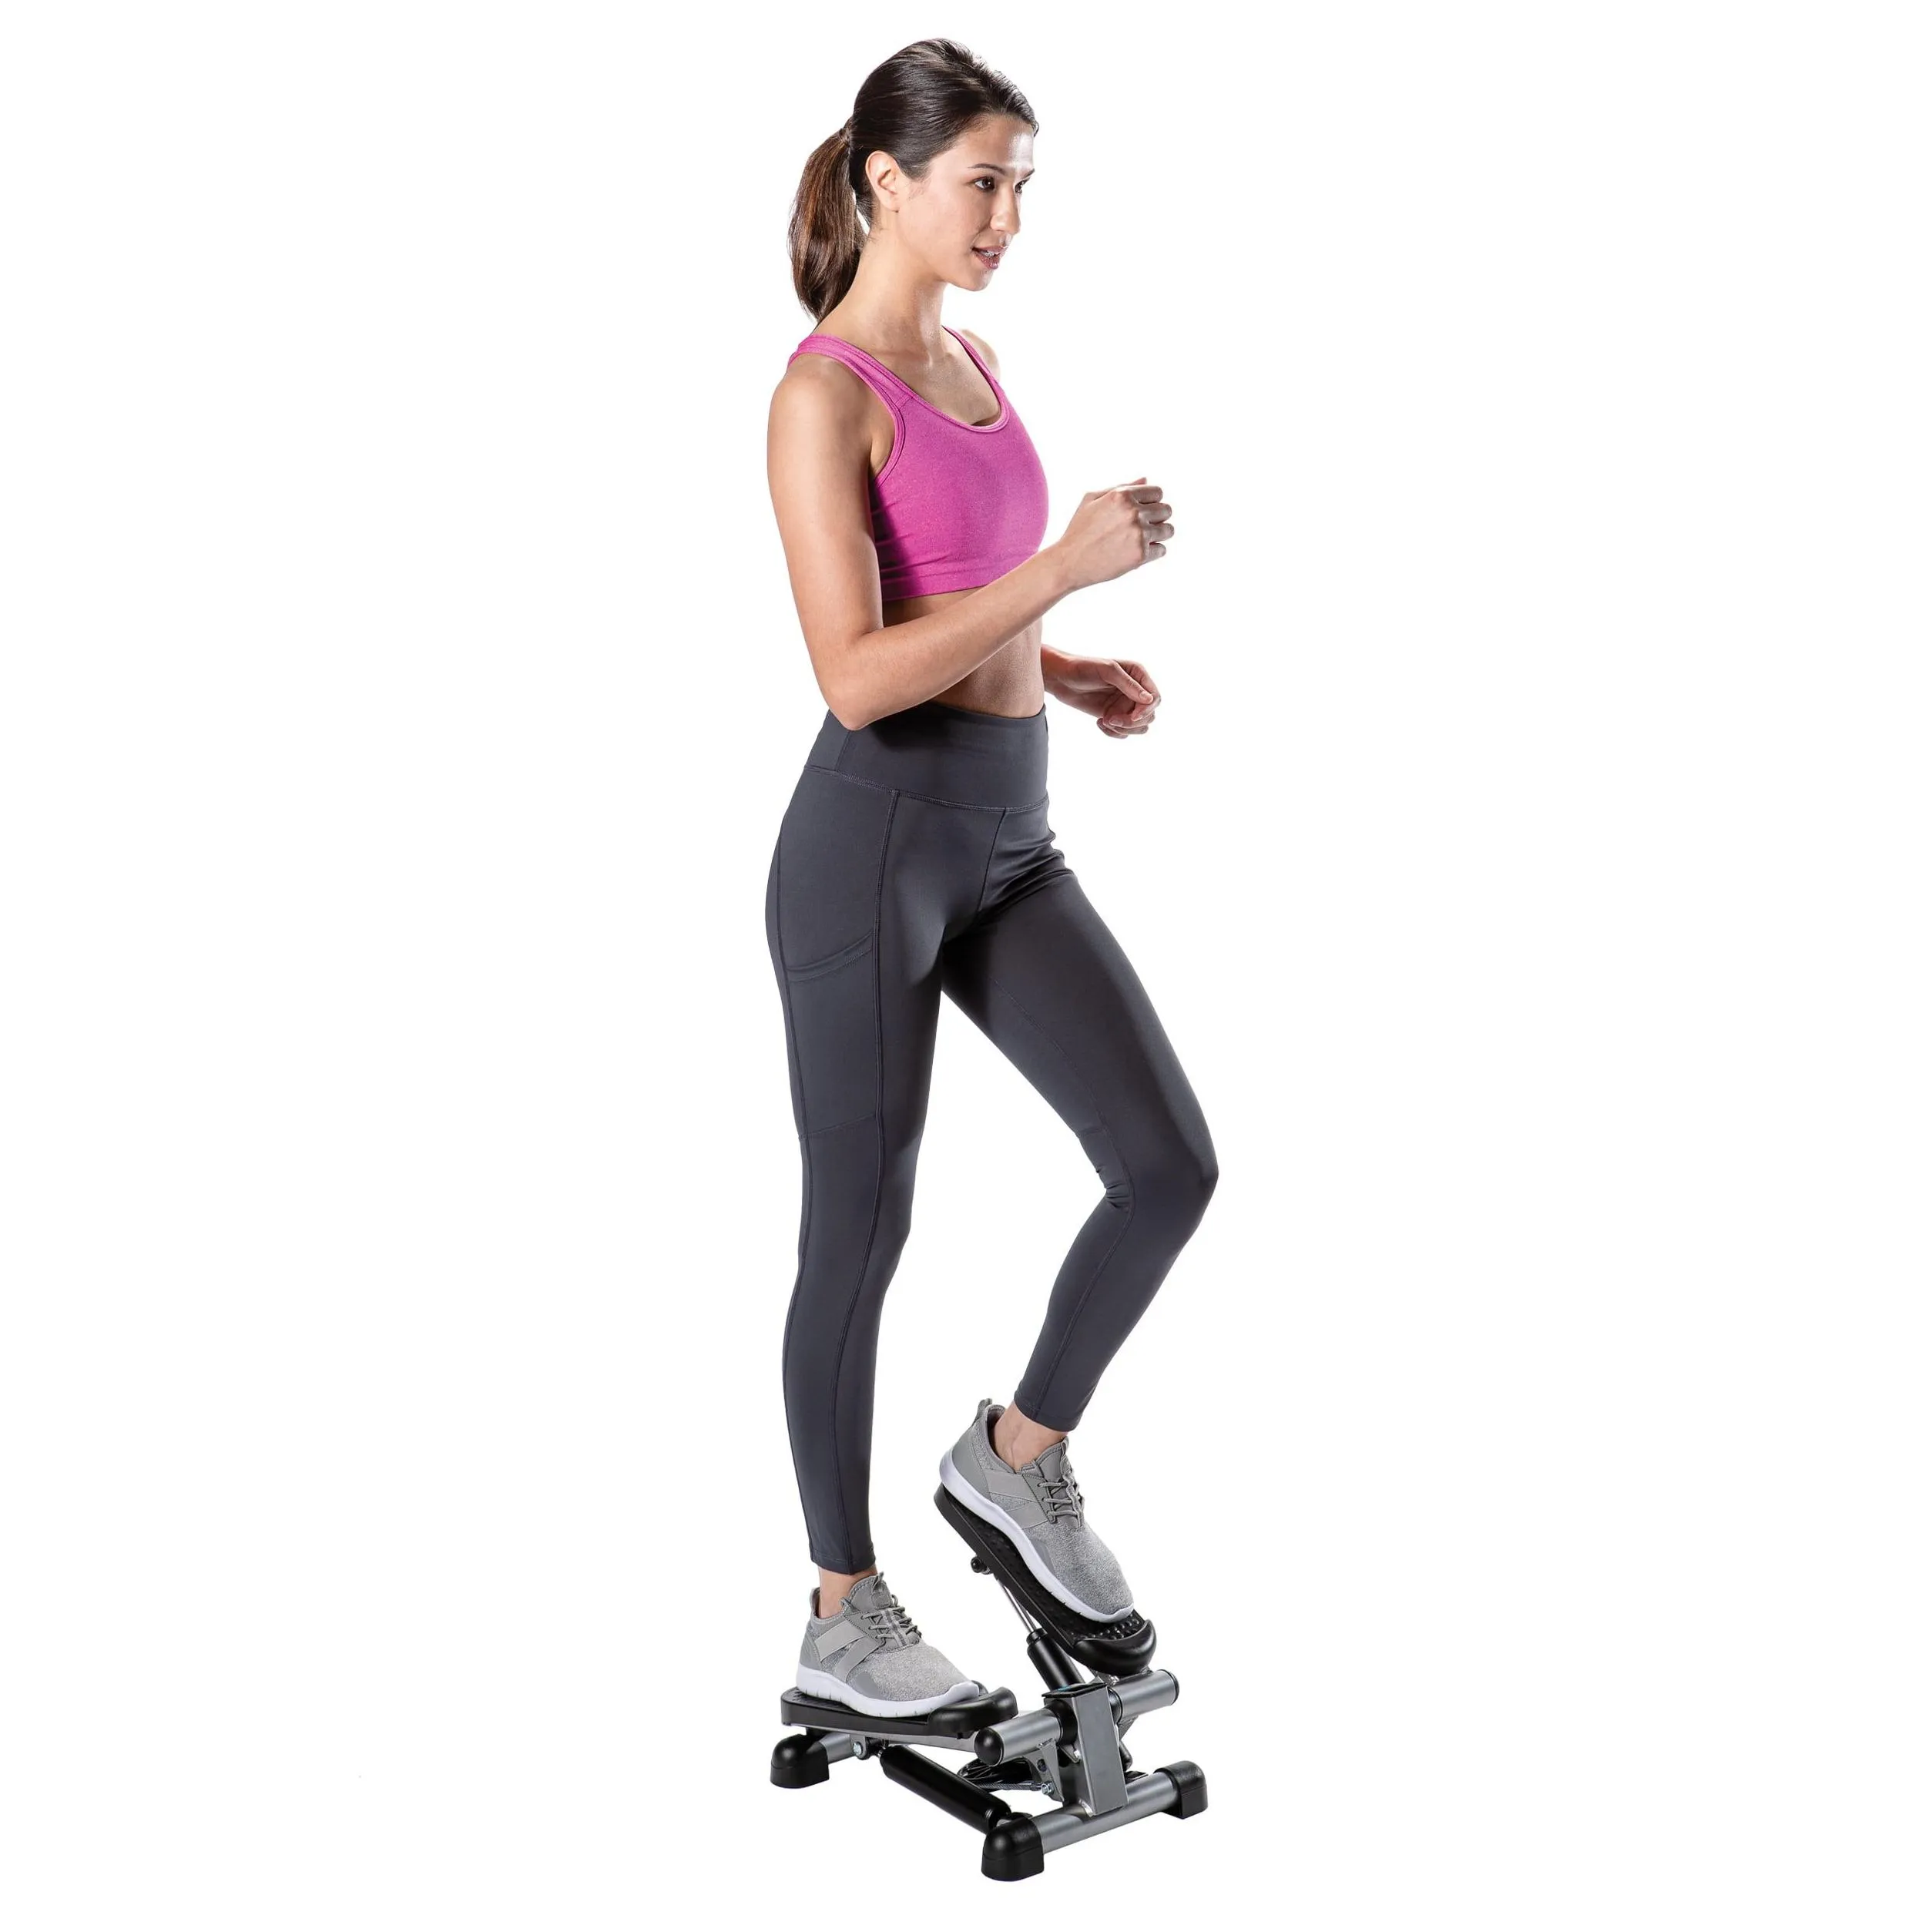 Other Sporting Goods Stamina Mini Stepper With Monitor - Low Impact Black And Gray Great Design For At Home Workouts Step Drop Deliver Dh10L